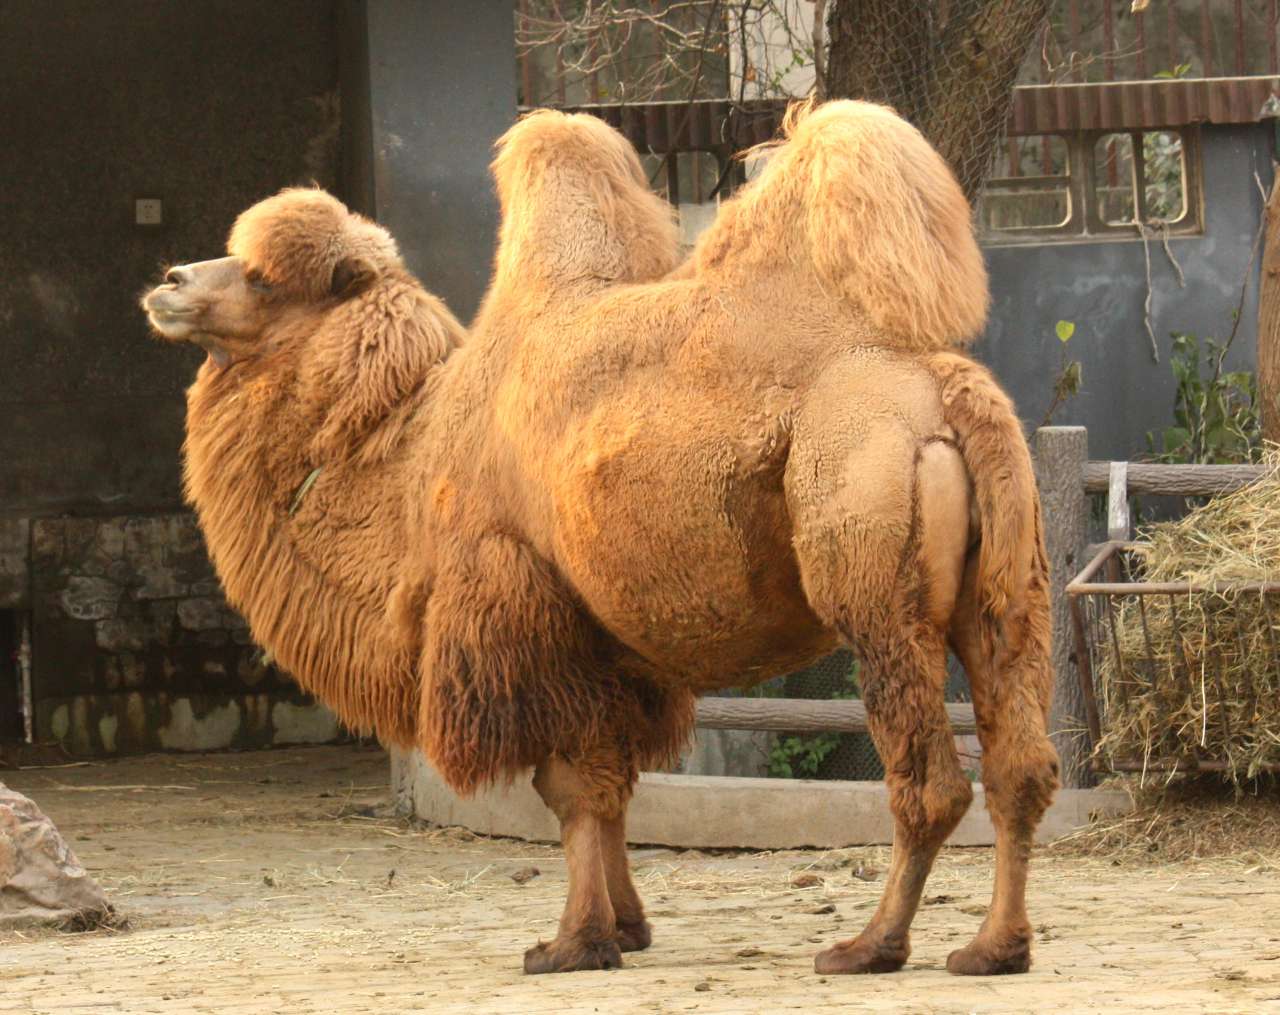 MERS found in camels imported to Iran